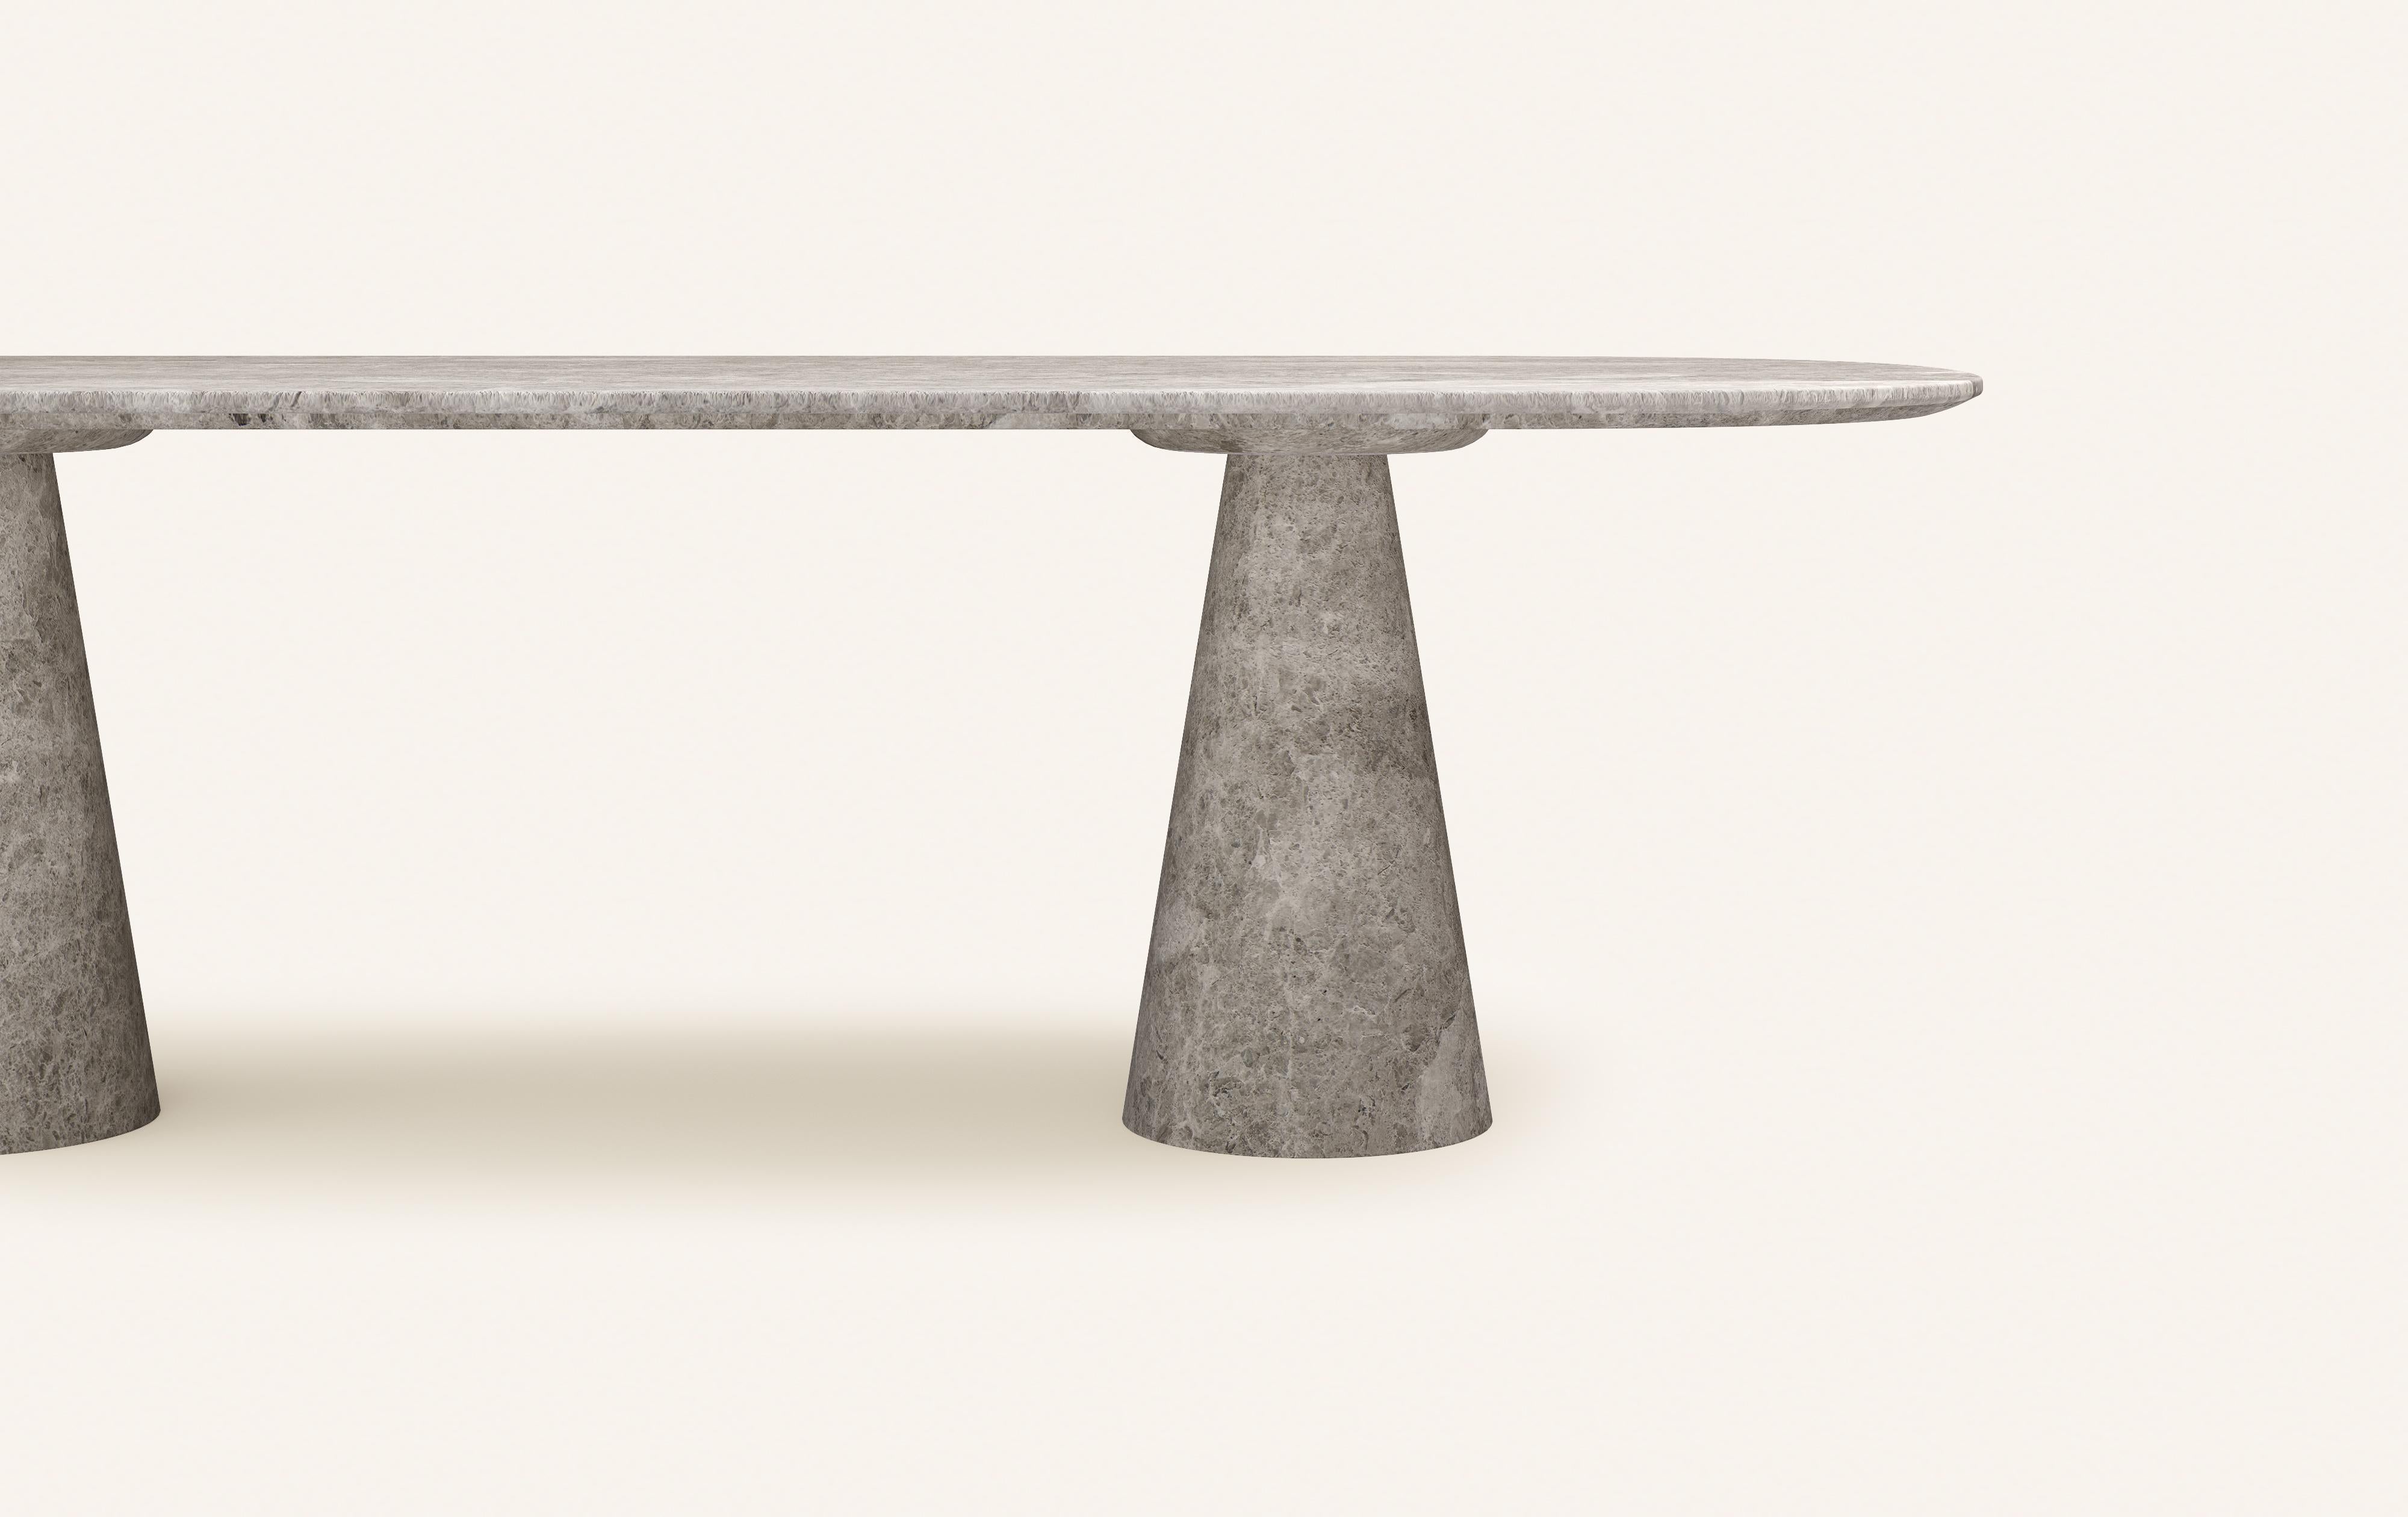 American FORM(LA) Cono Oval Dining Table 118”L x 48”W x 30”H Tundra Gray Marble For Sale